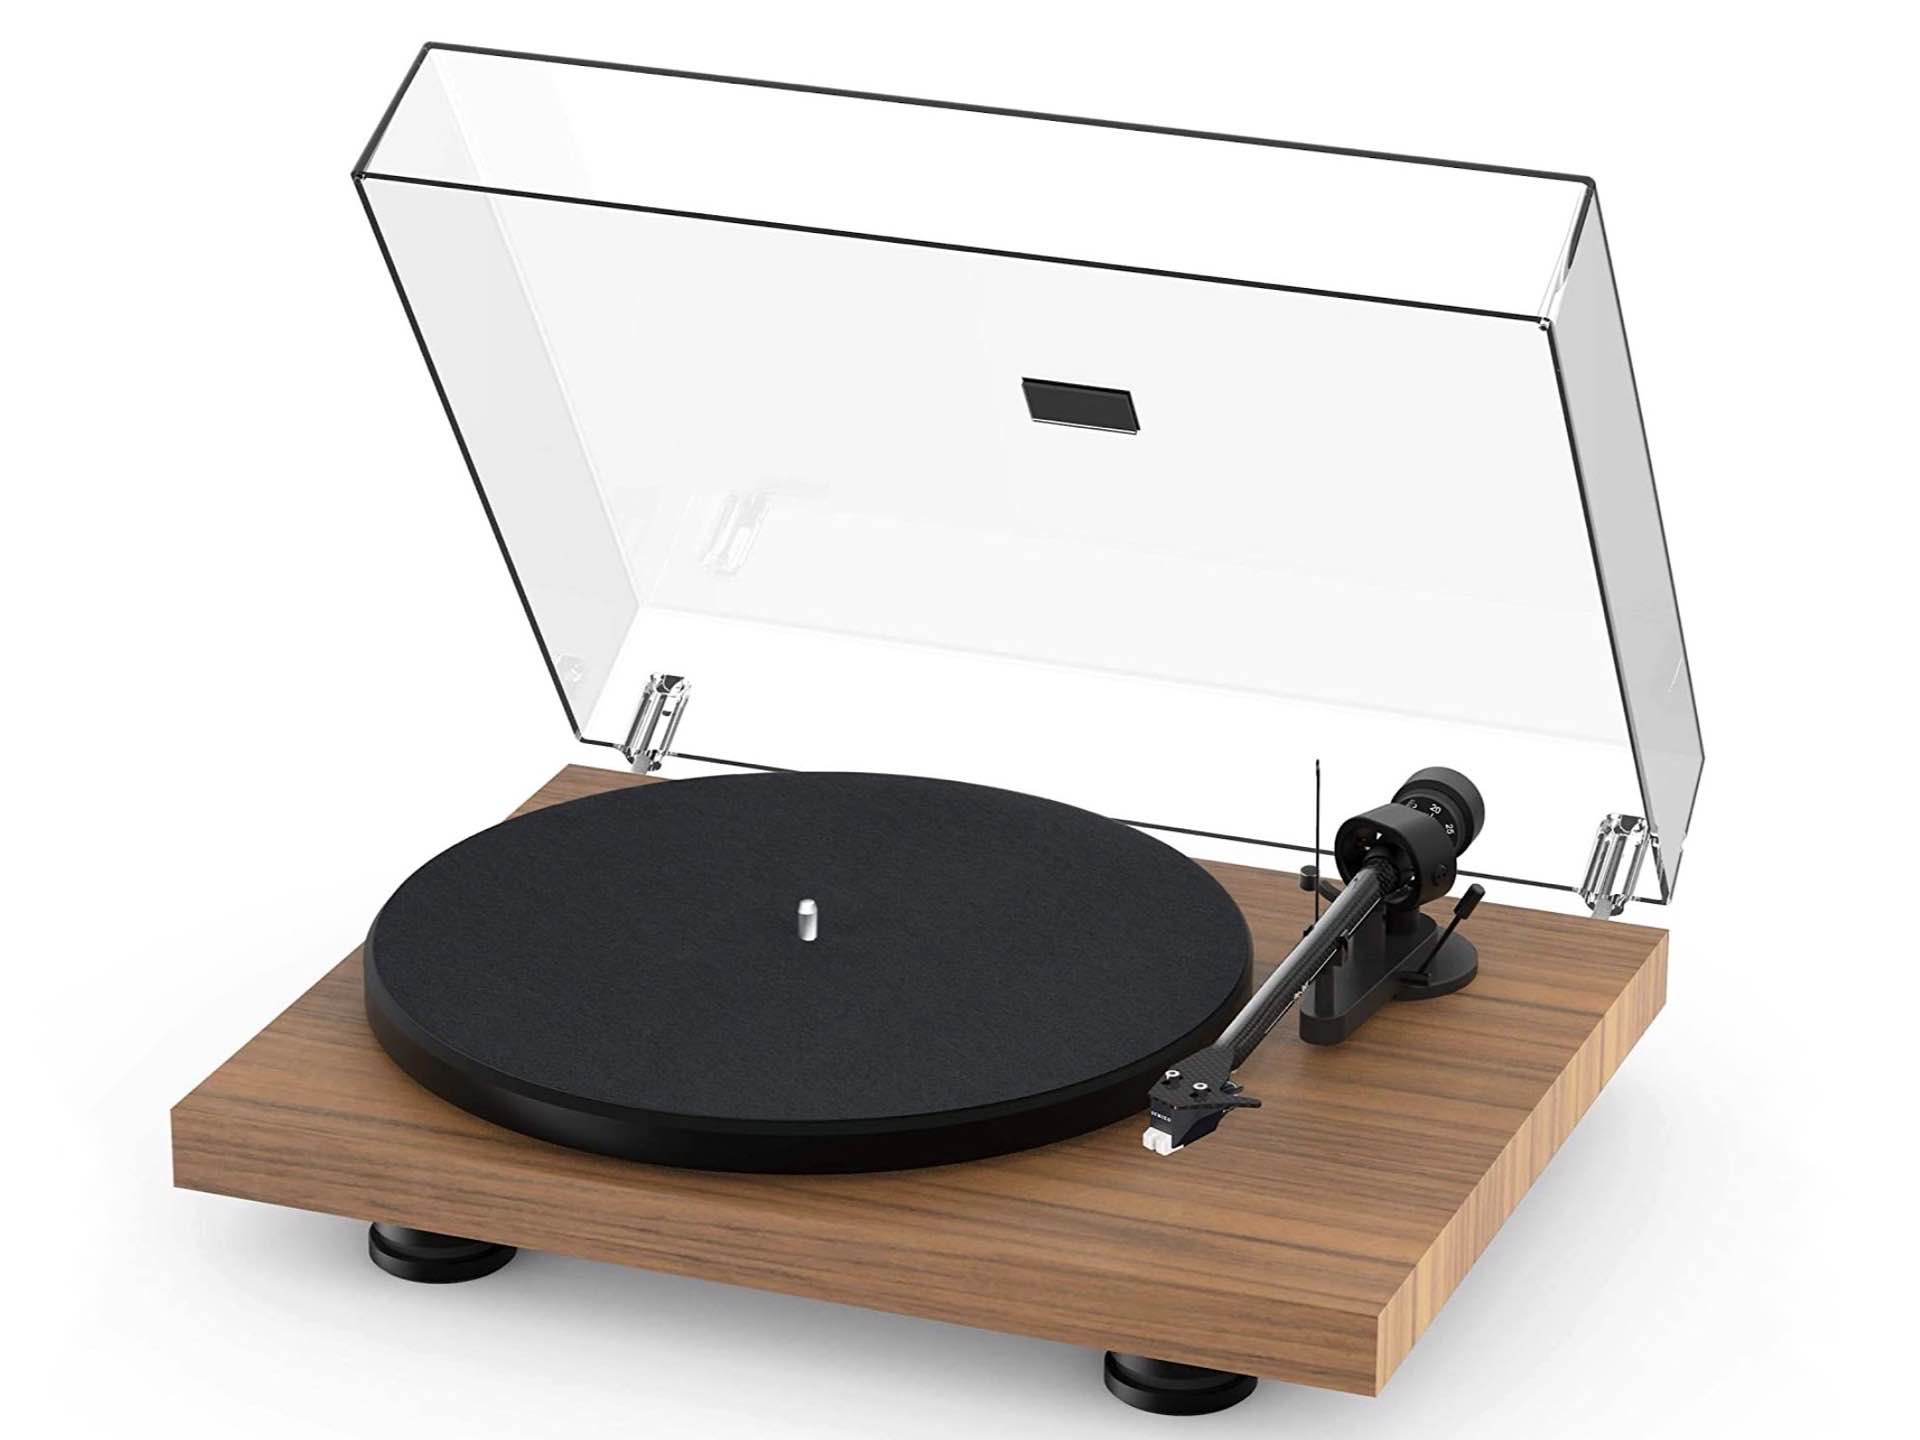 Pro-ject Debut Carbon EVO turntable. ($599)